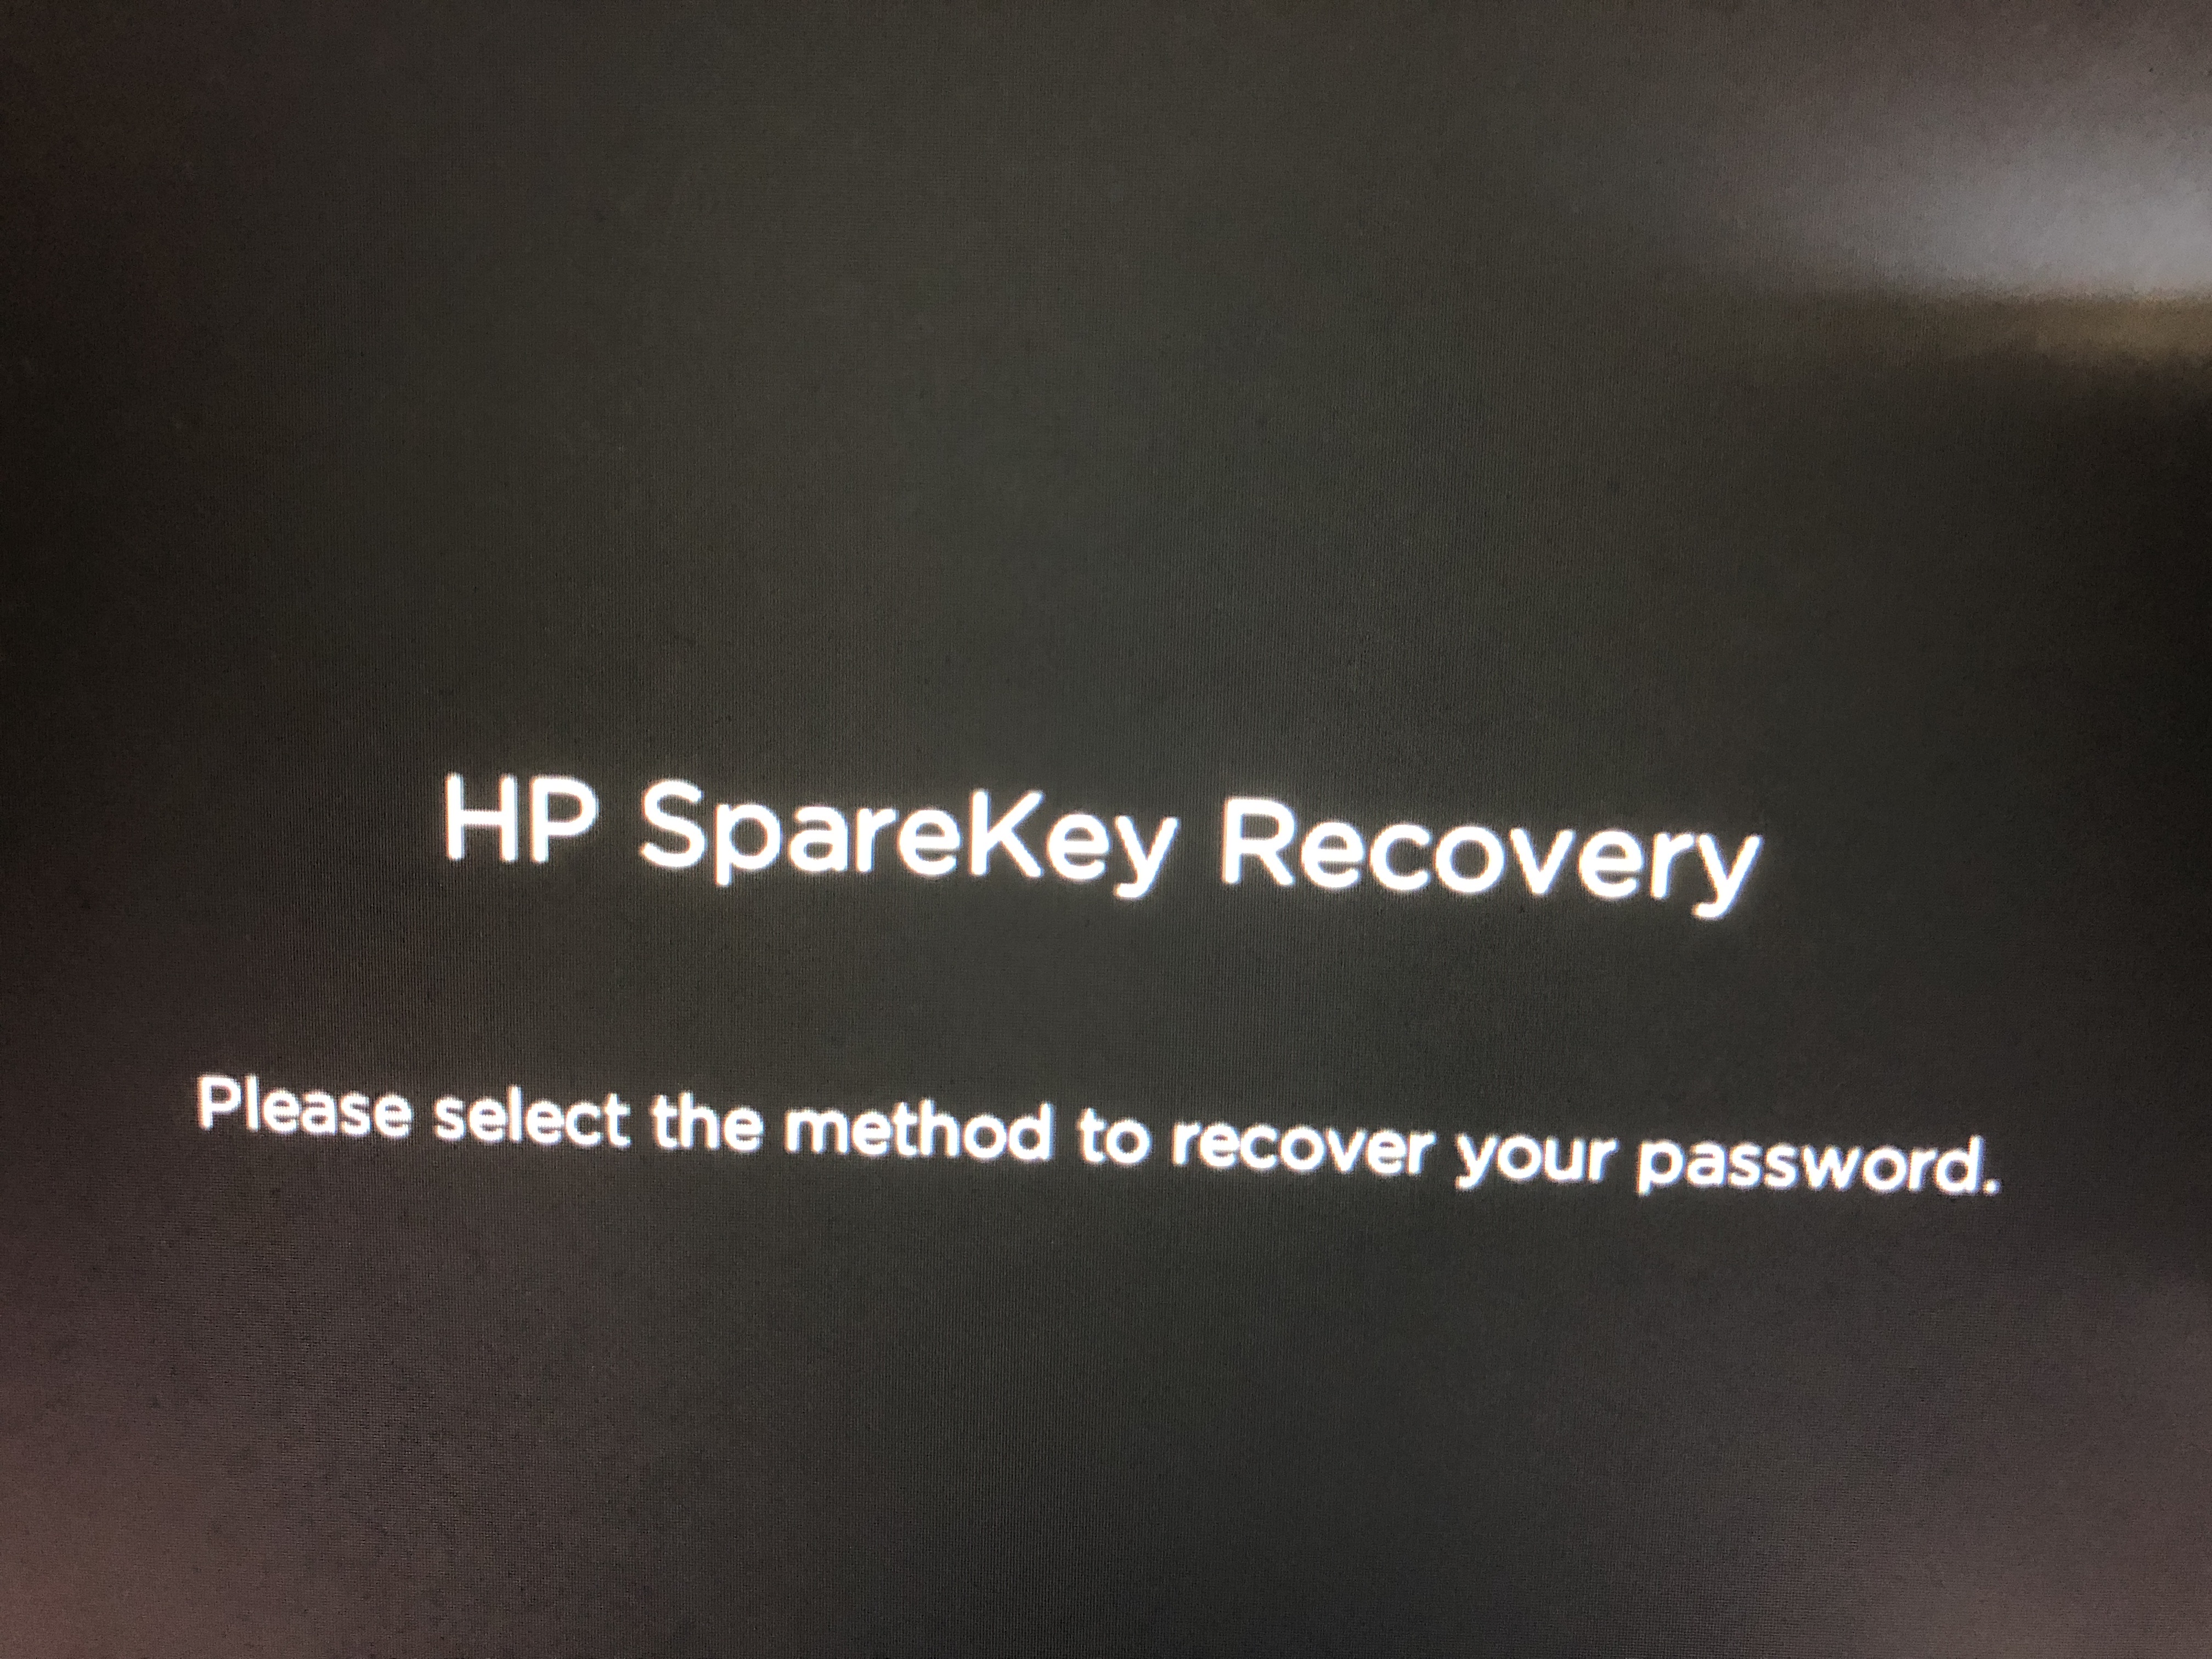 Hp sparekey recovery on startup - HP Support Community - 8339944